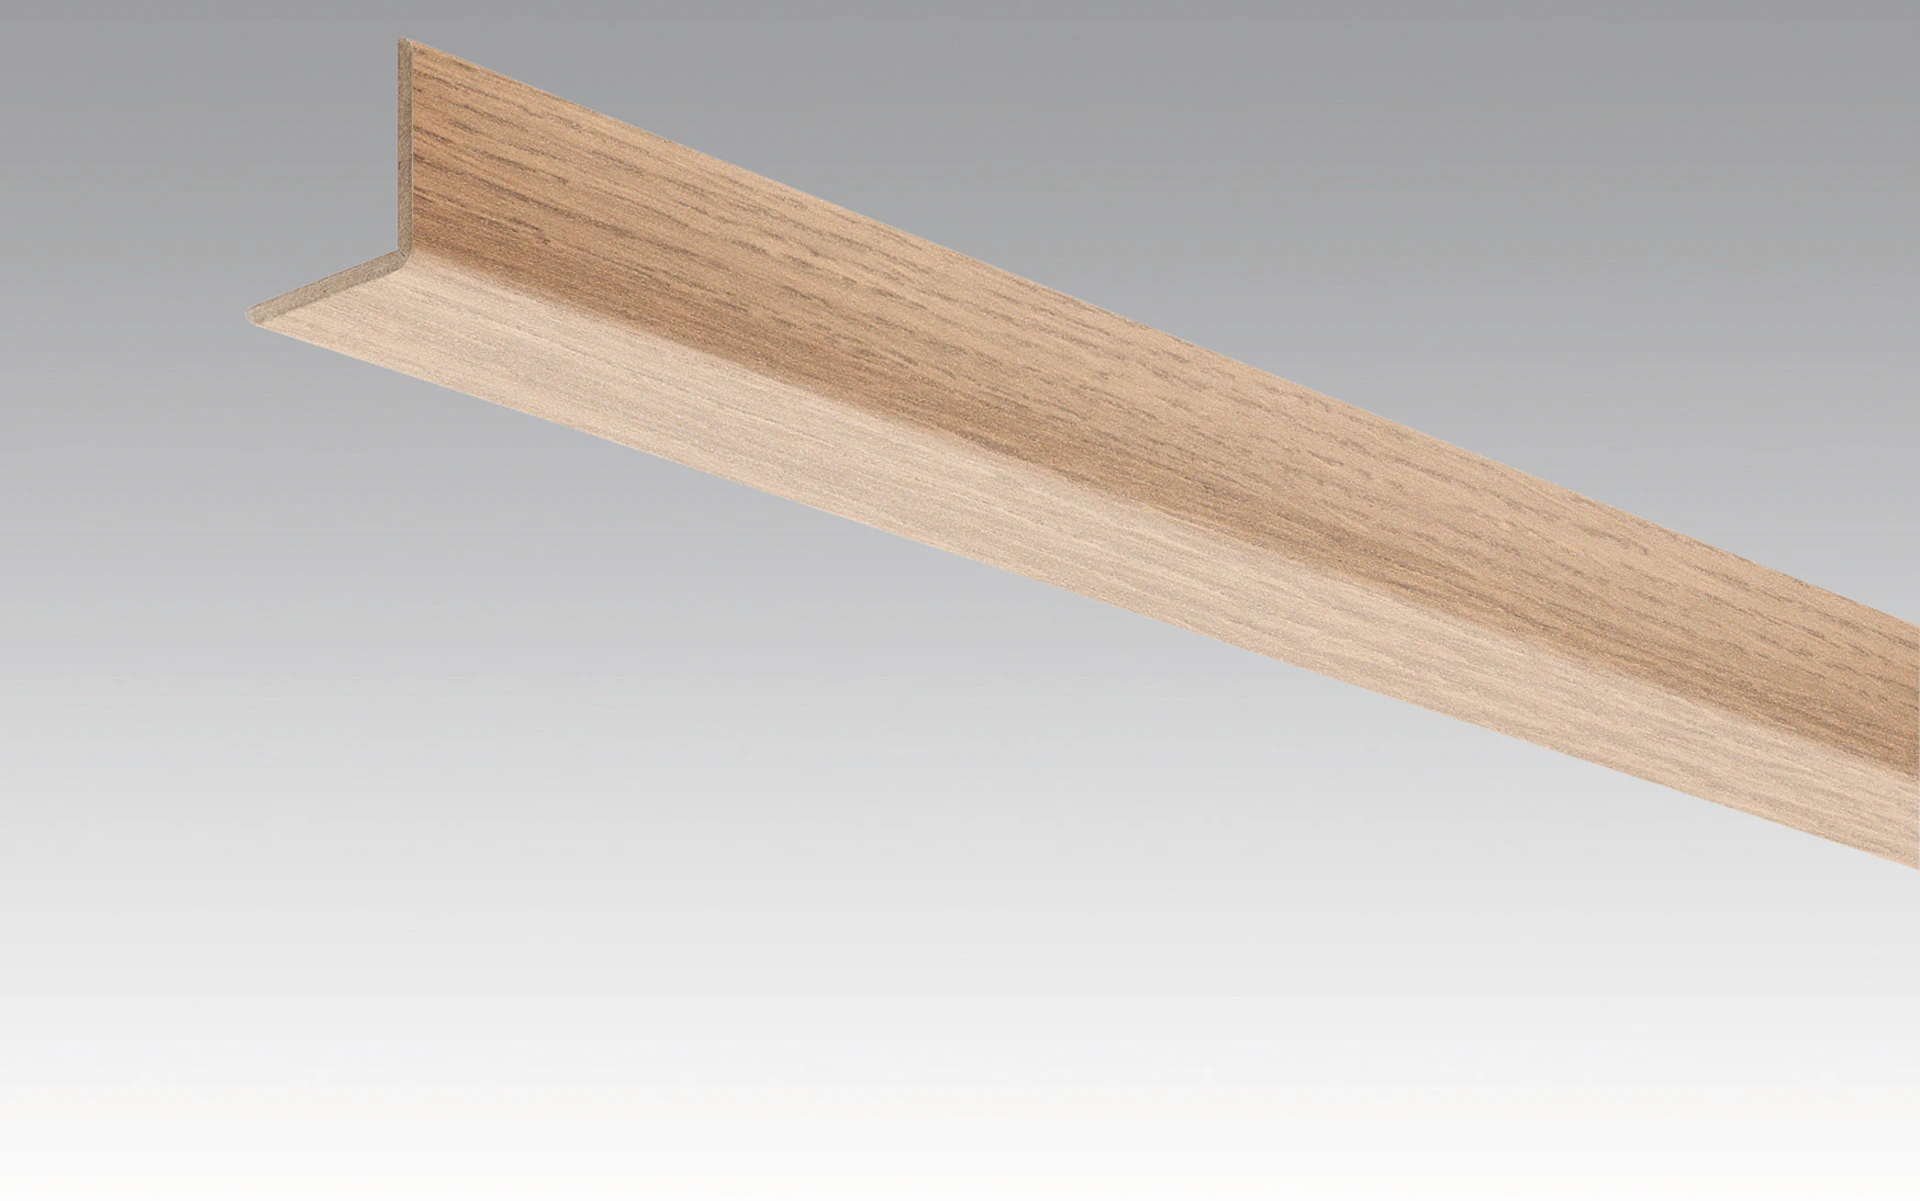 MEISTER Skirting Boards Angle Skirting Oak Nature 001 - 2380 x 33 x 3.5 mm